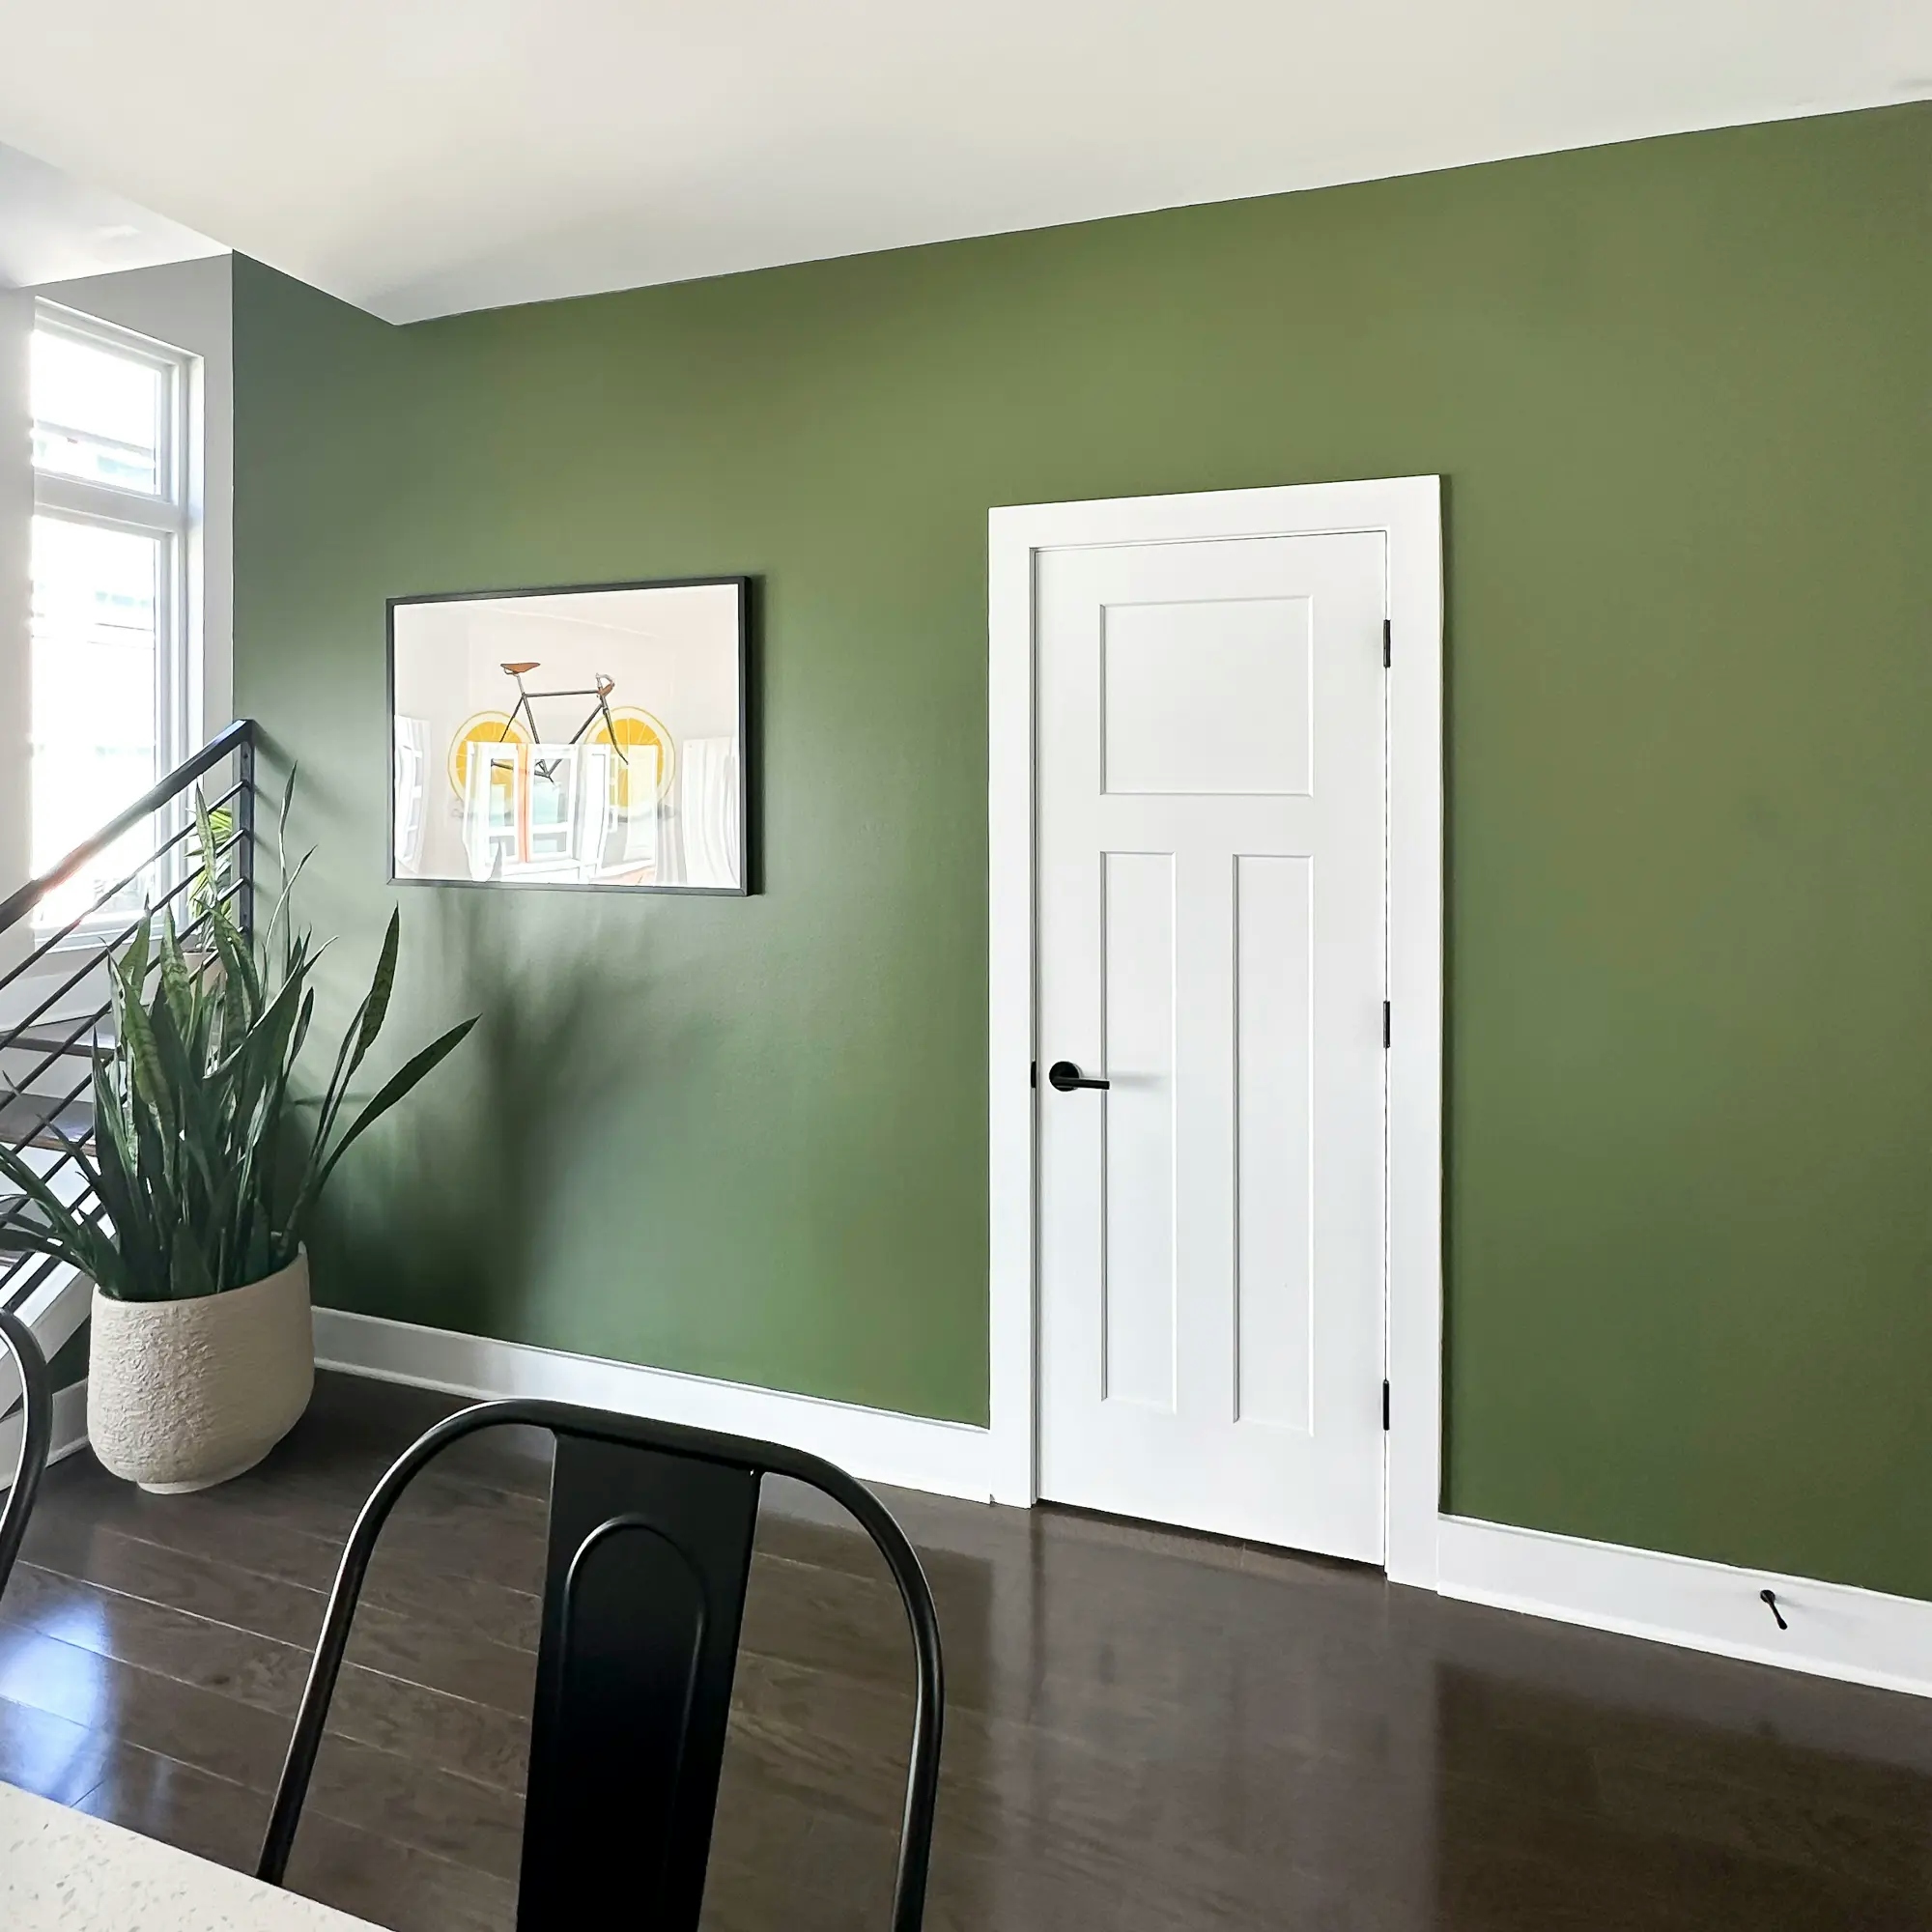 “We used Craftwork to repair and paint the accent wall in our kitchen, and we’re very happy with it.”